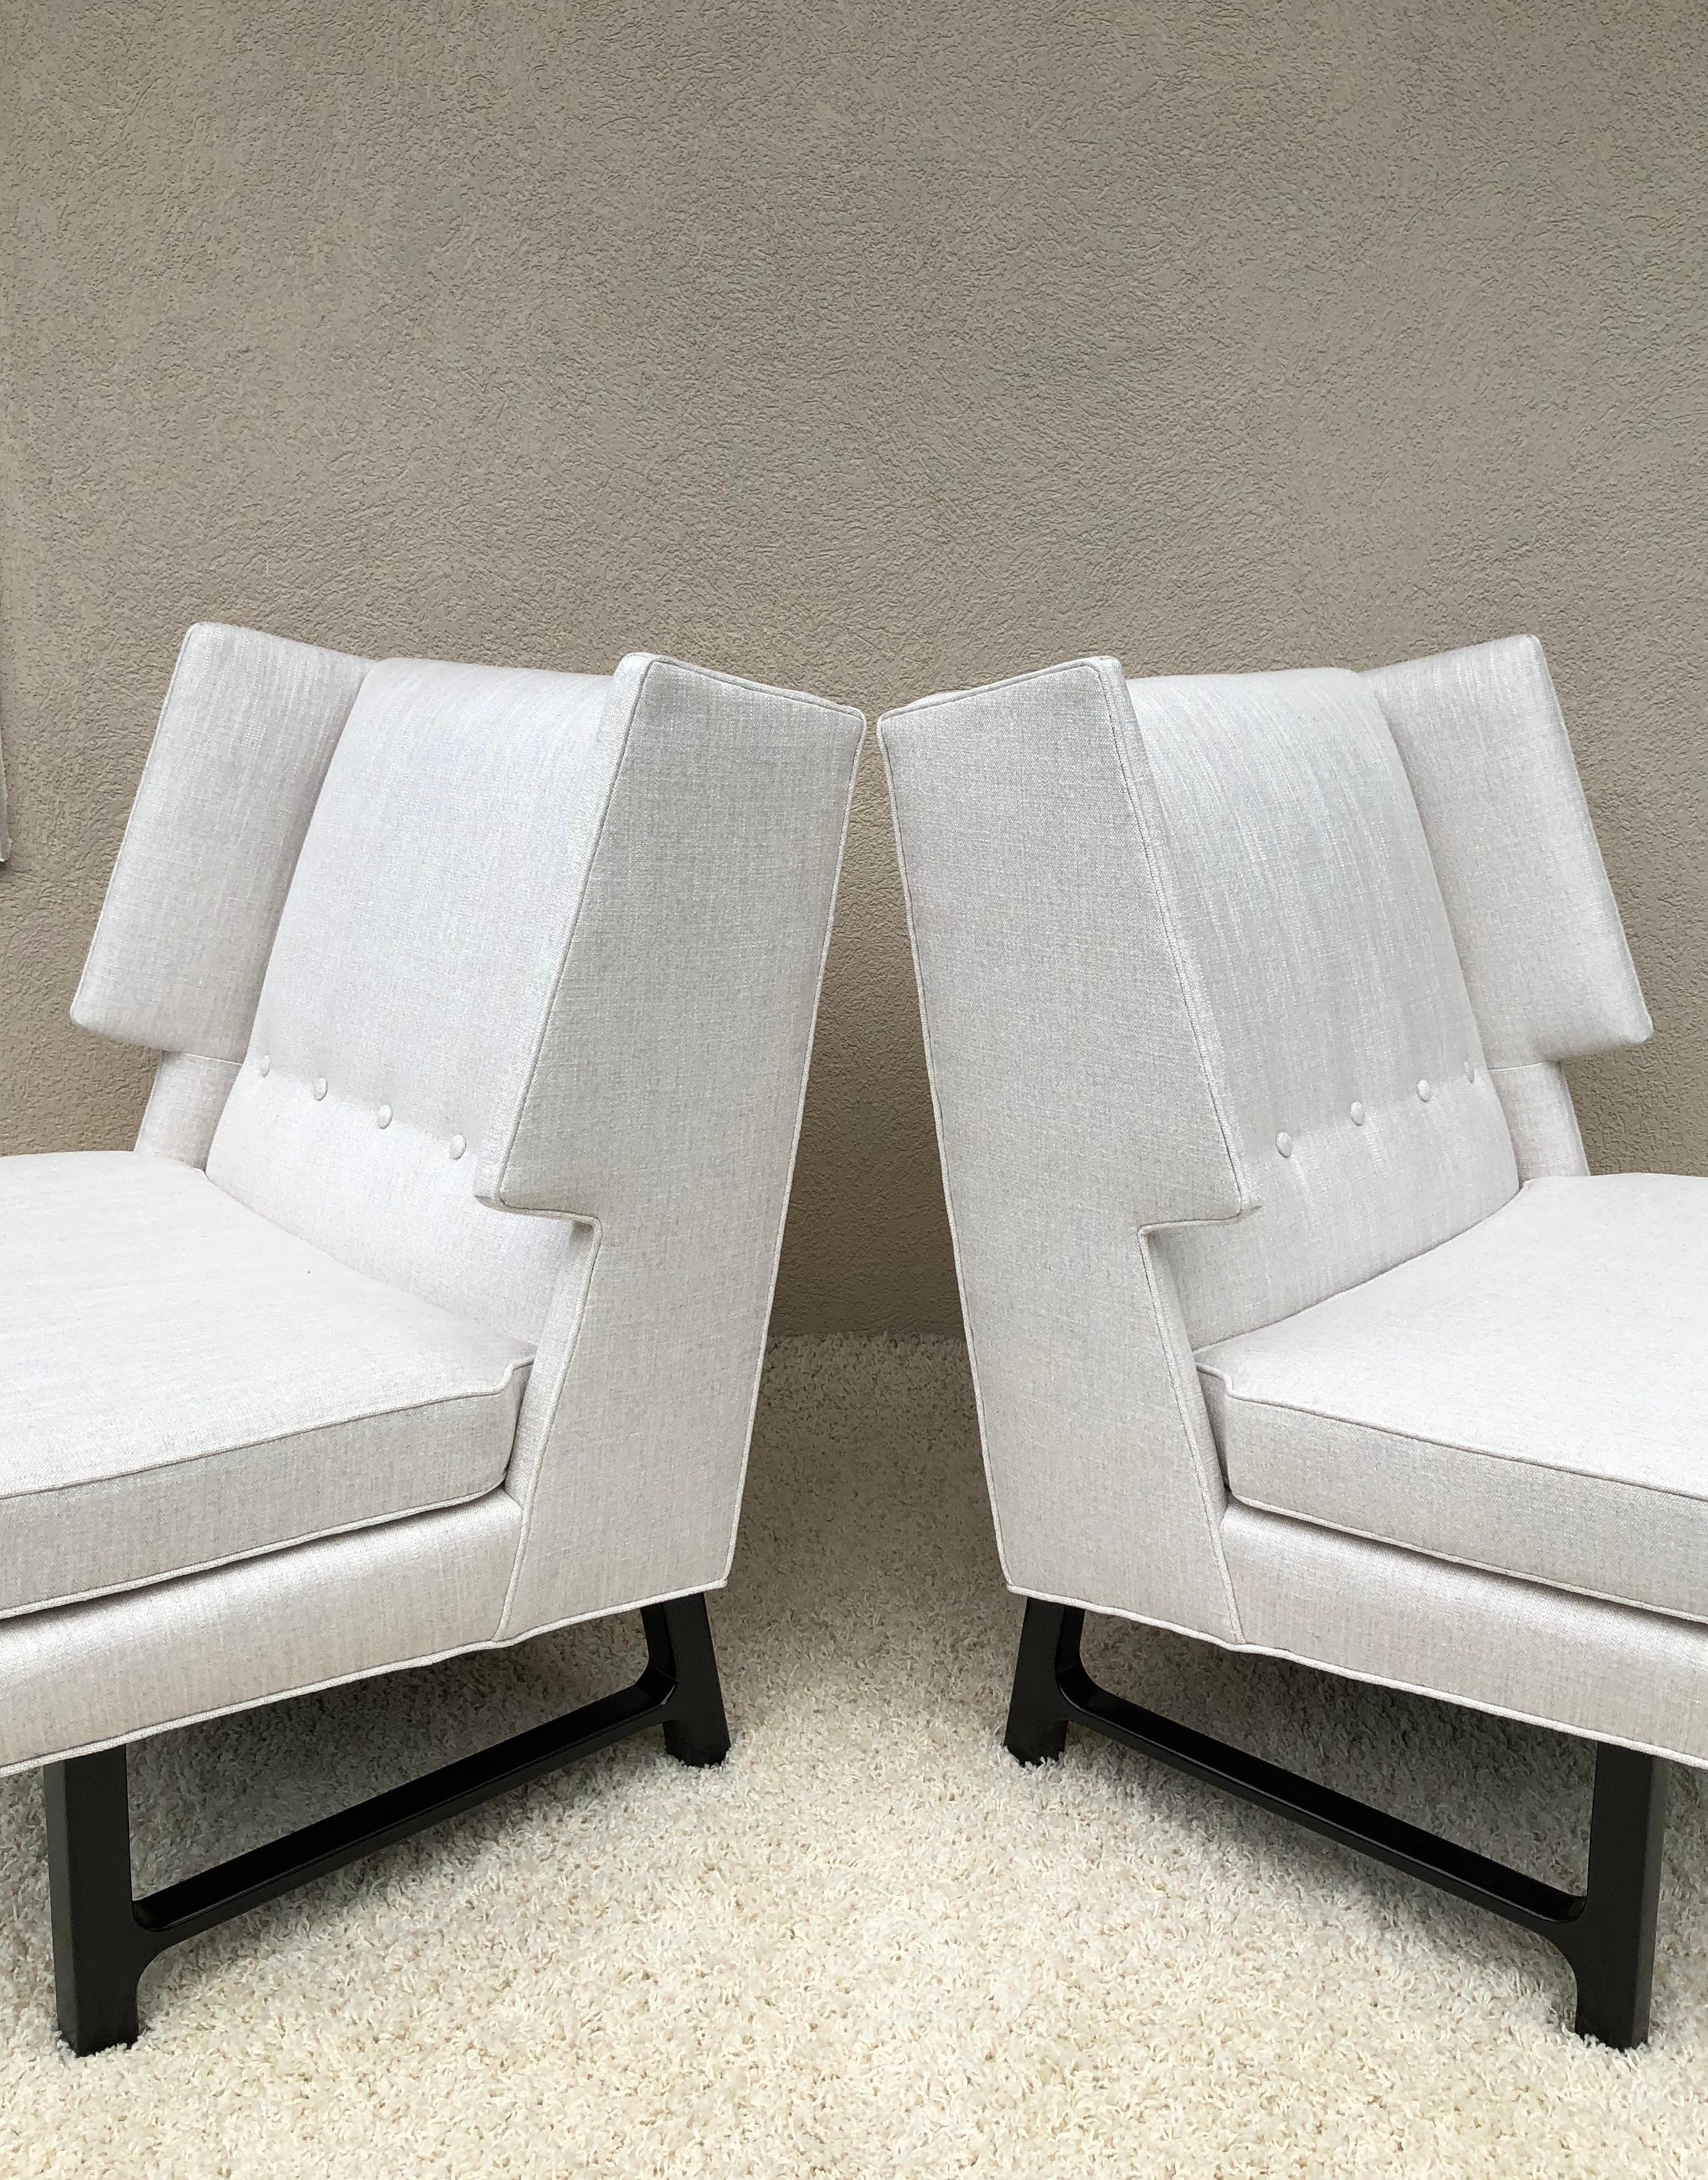 Pair of Harvey Probber High Back Chairs Wormley Estate Weston ct For Sale 4